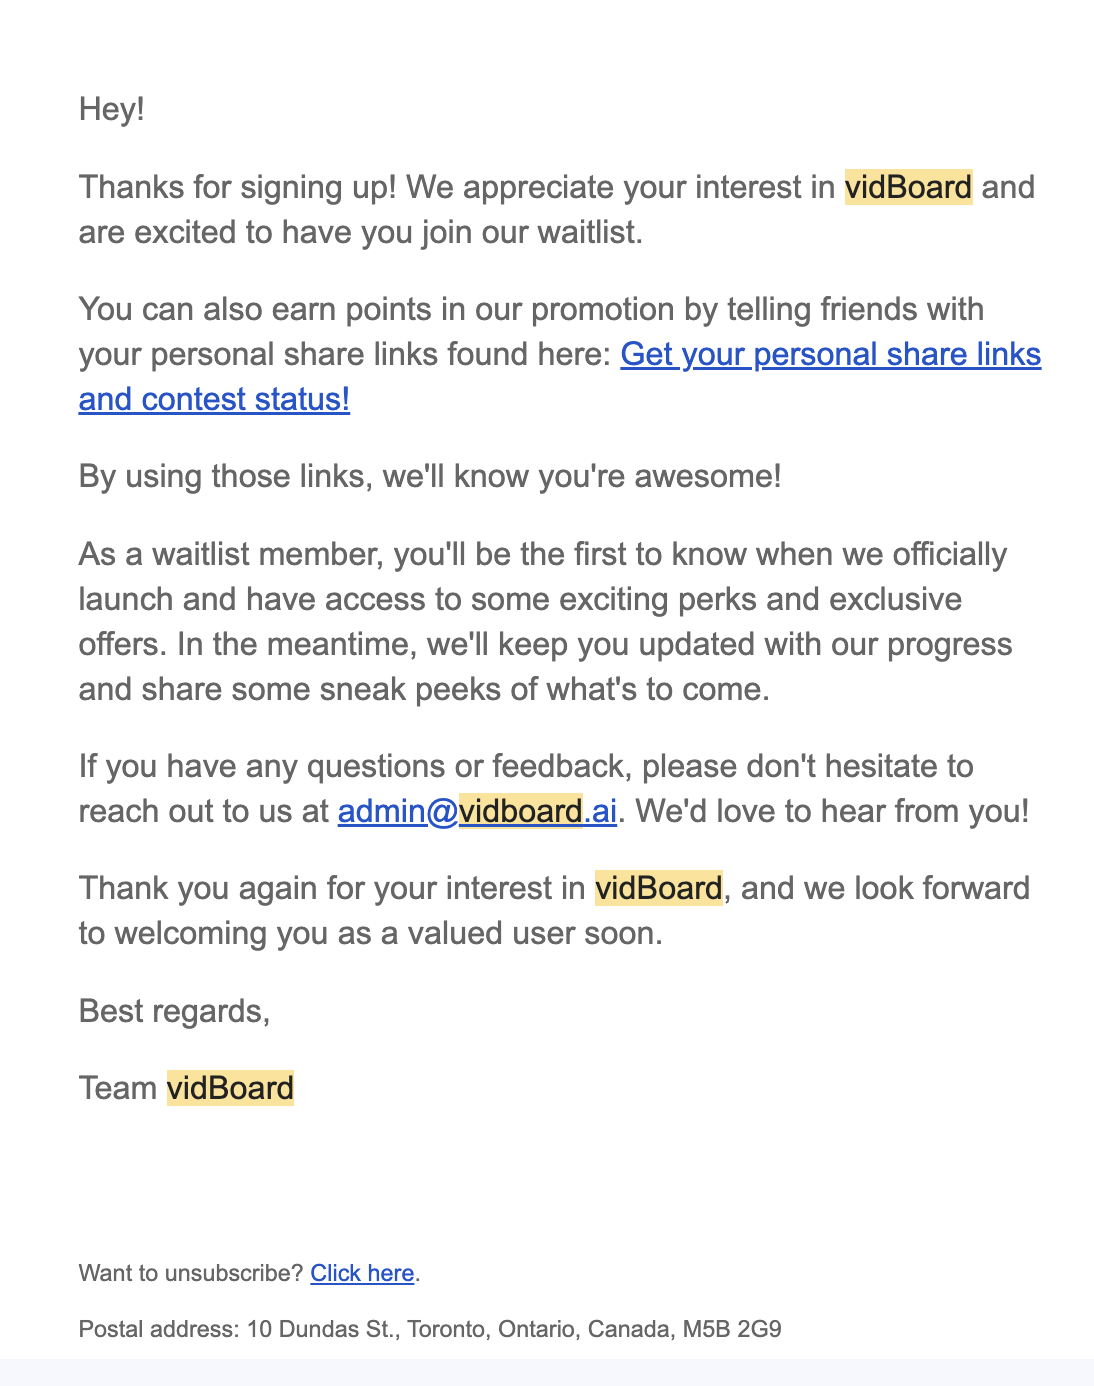 SaaS Waitlist Emails: Screenshot of vidBoard's welcome email for waitlist members